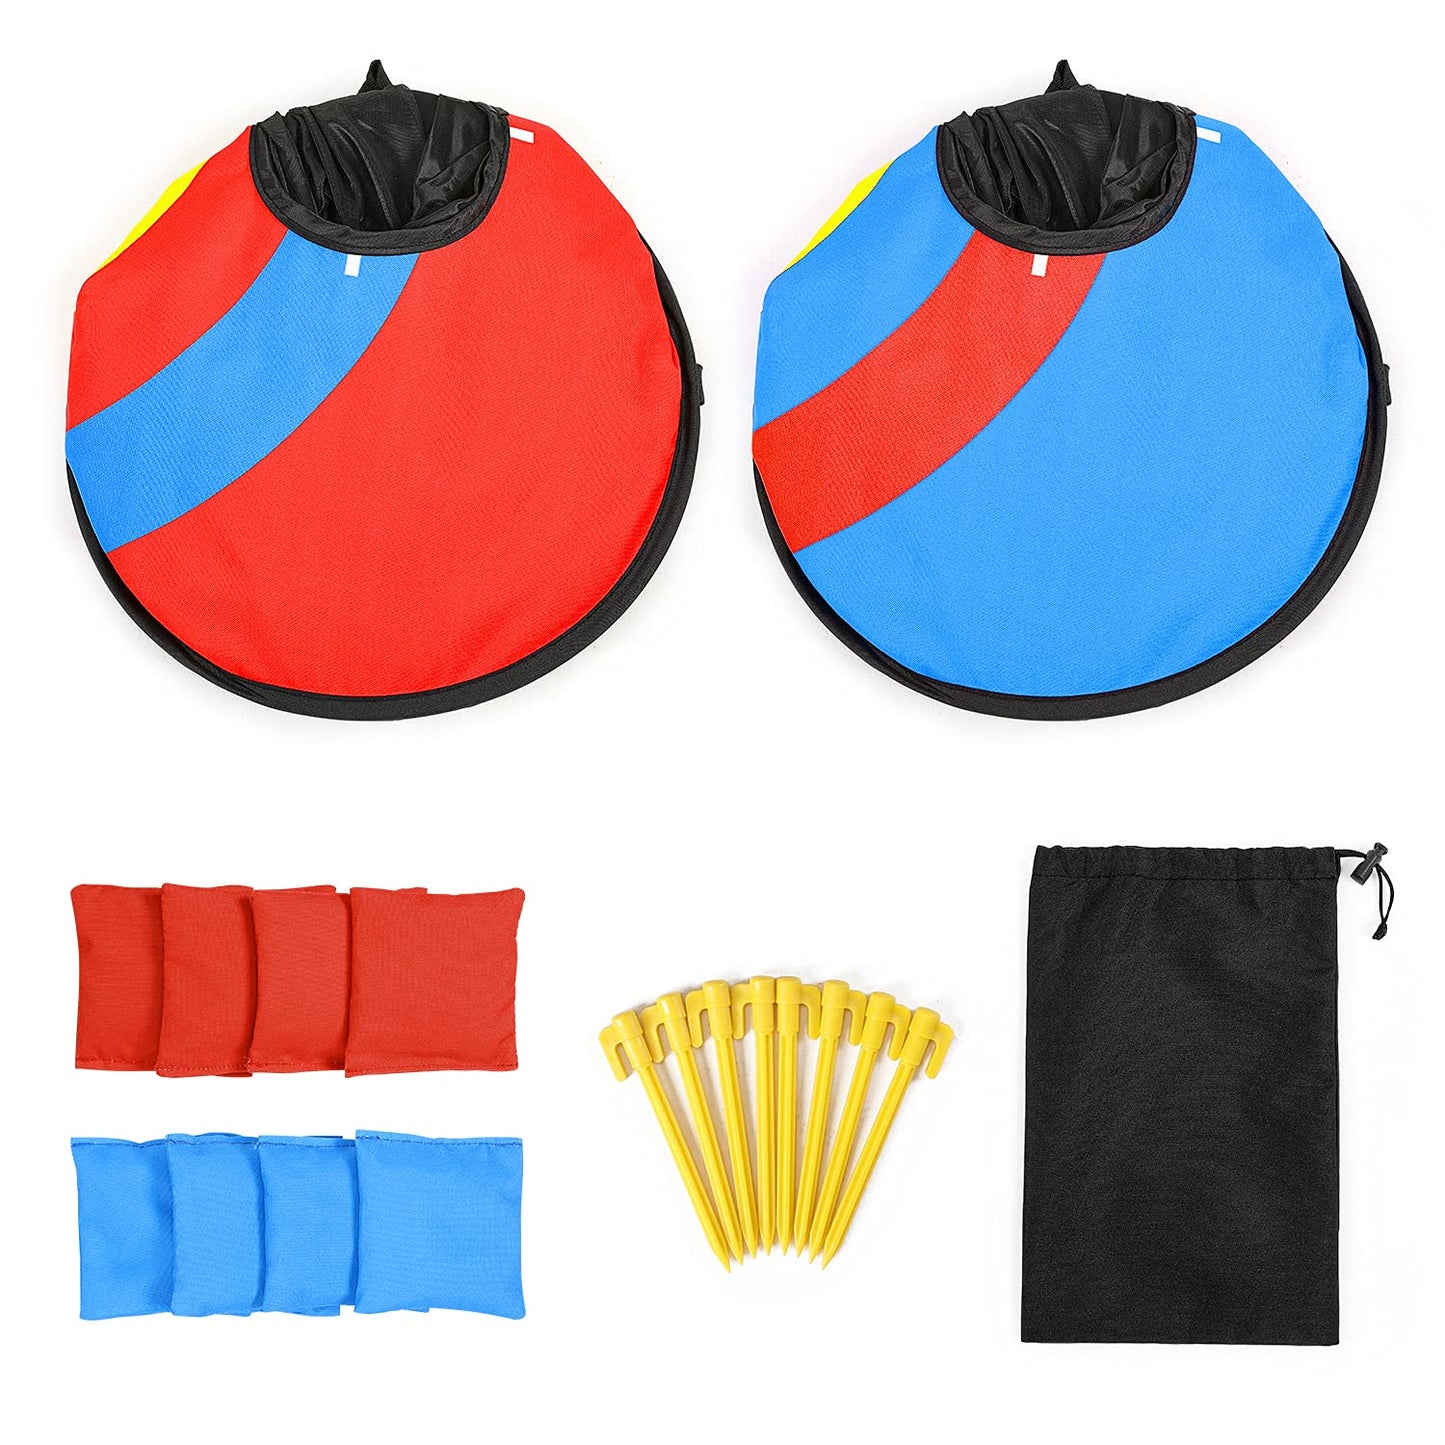 G4Free Portable Collapsible 5 Holes Cornhole Game Set with 8 Bean Bags